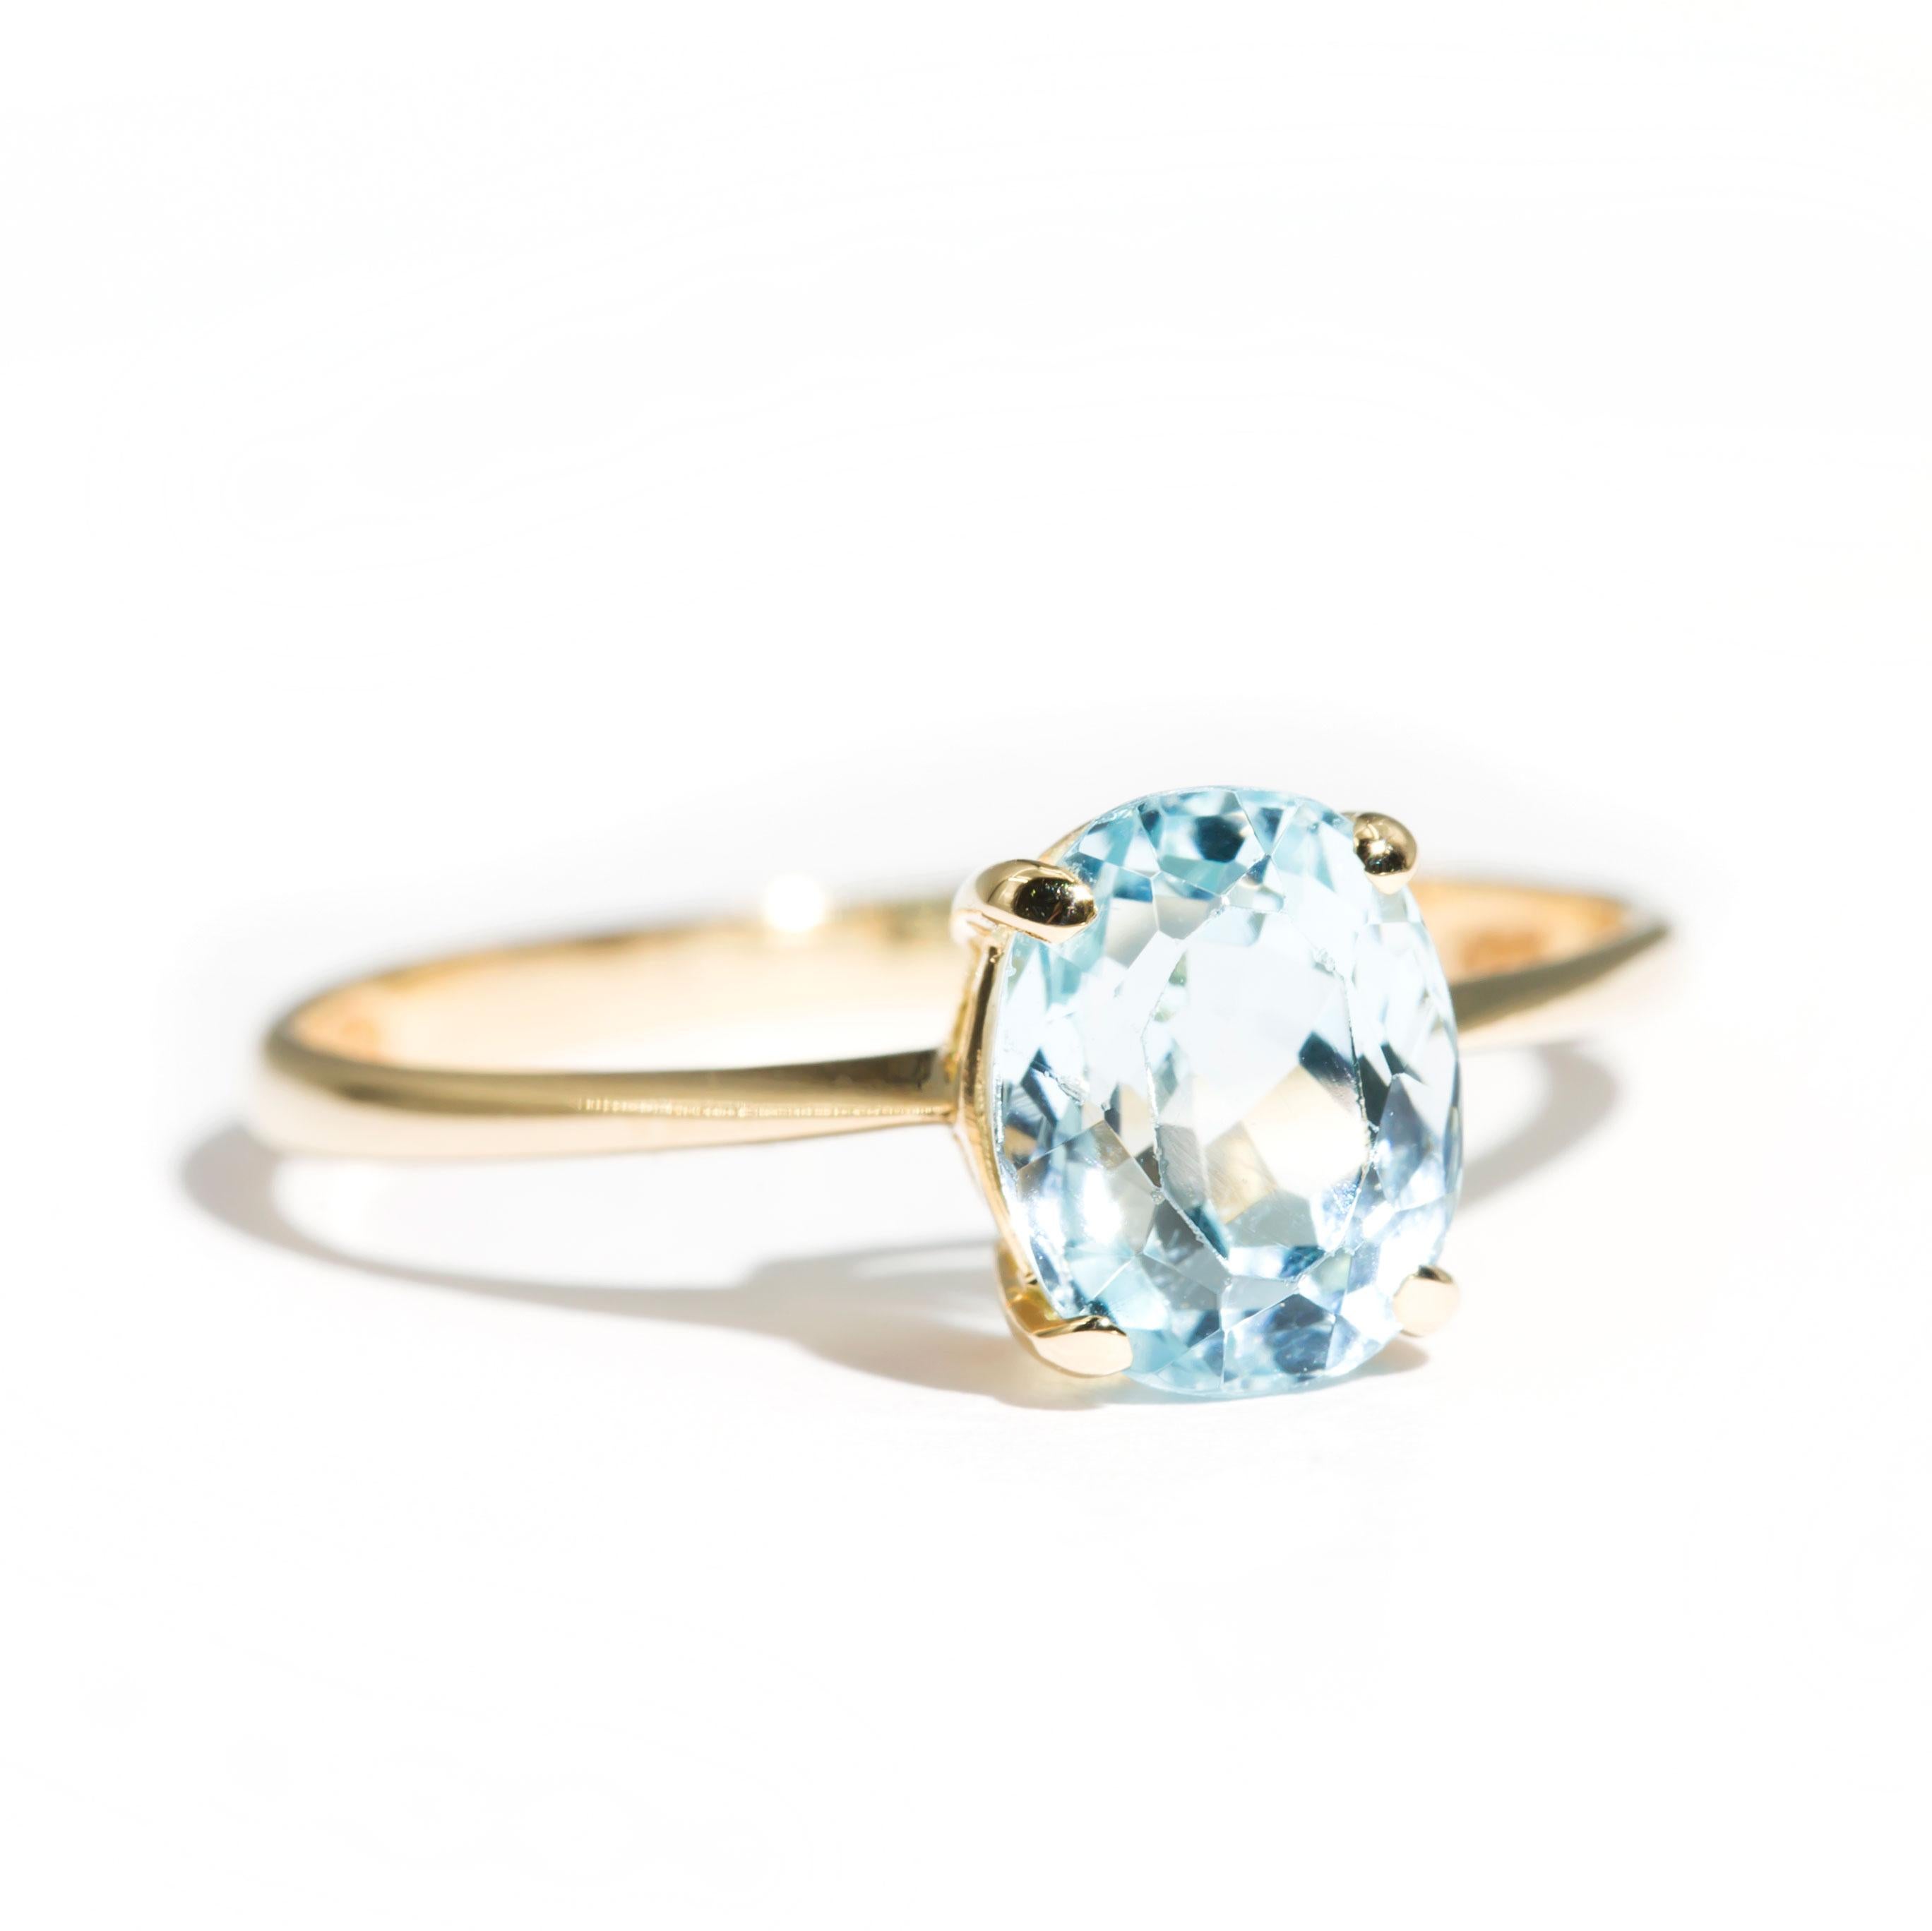 Crafted in 14 carat yellow gold, this charming vintage solitaire ring features a lovely 1.84 carat bright light blue oval aquamarine. We have named this vintage splendour The Sally Ring. The Sally Ring is a darling ring that is embodies romance and